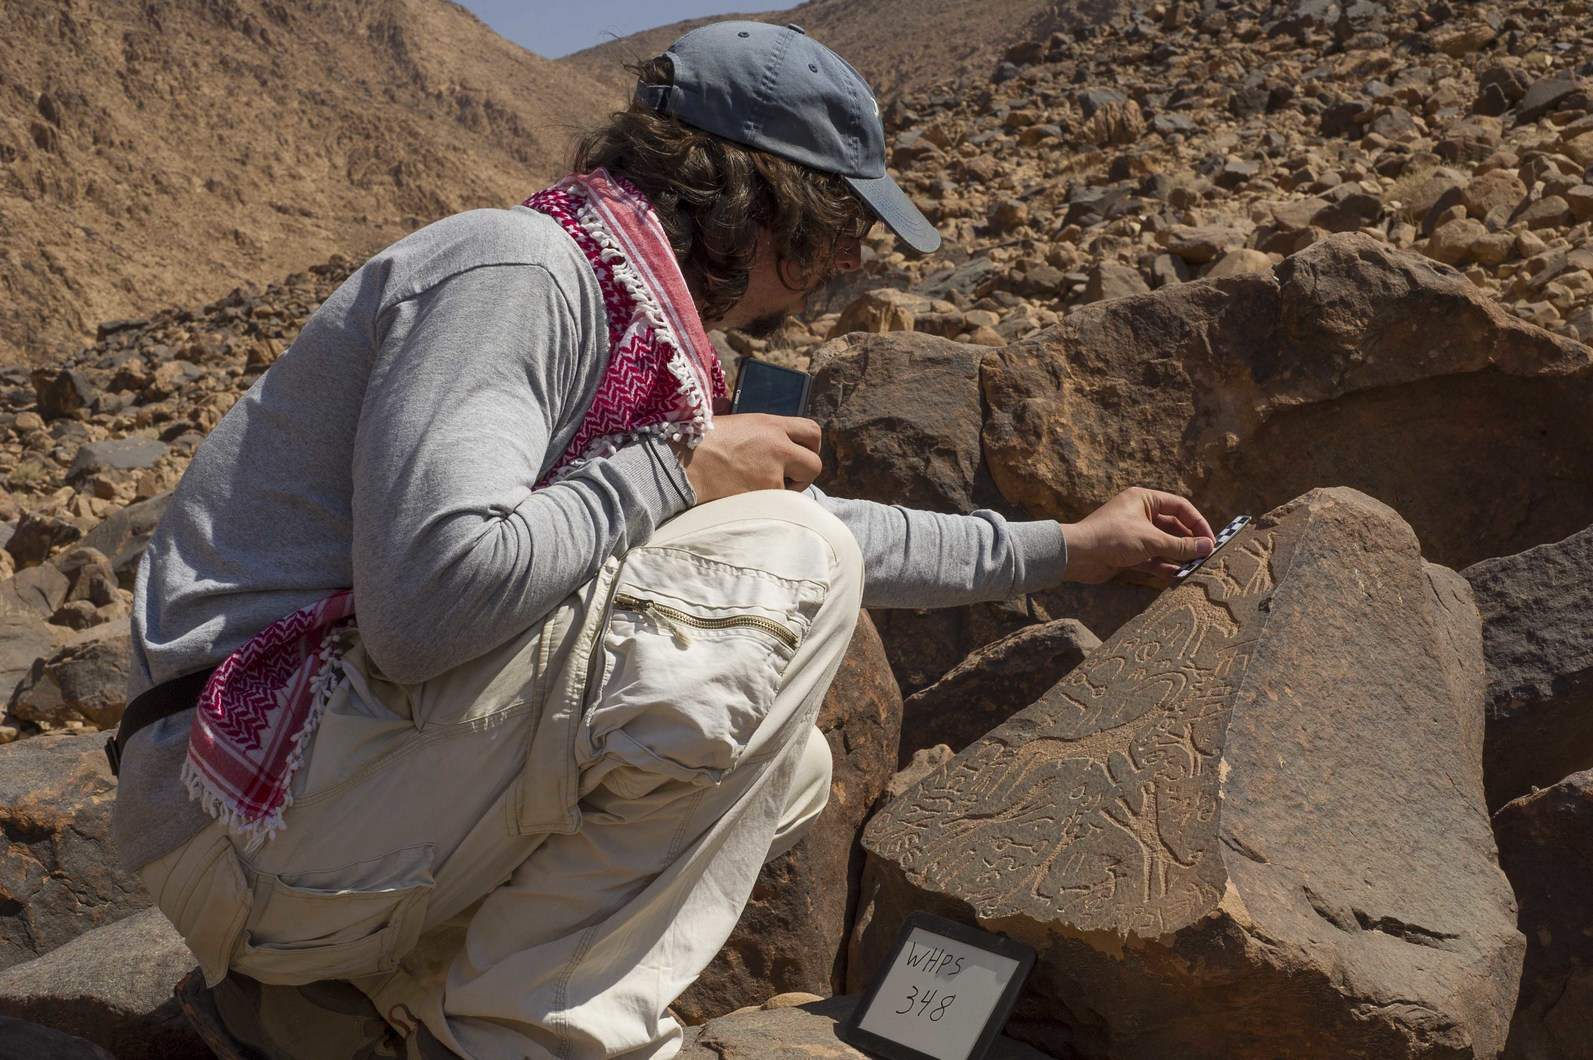 Glenn Corbett places a scale on a stone carved with several Hismaic inscriptions, one of which signs a scene of an ibex hunt. Photo by Michael Fergusson.